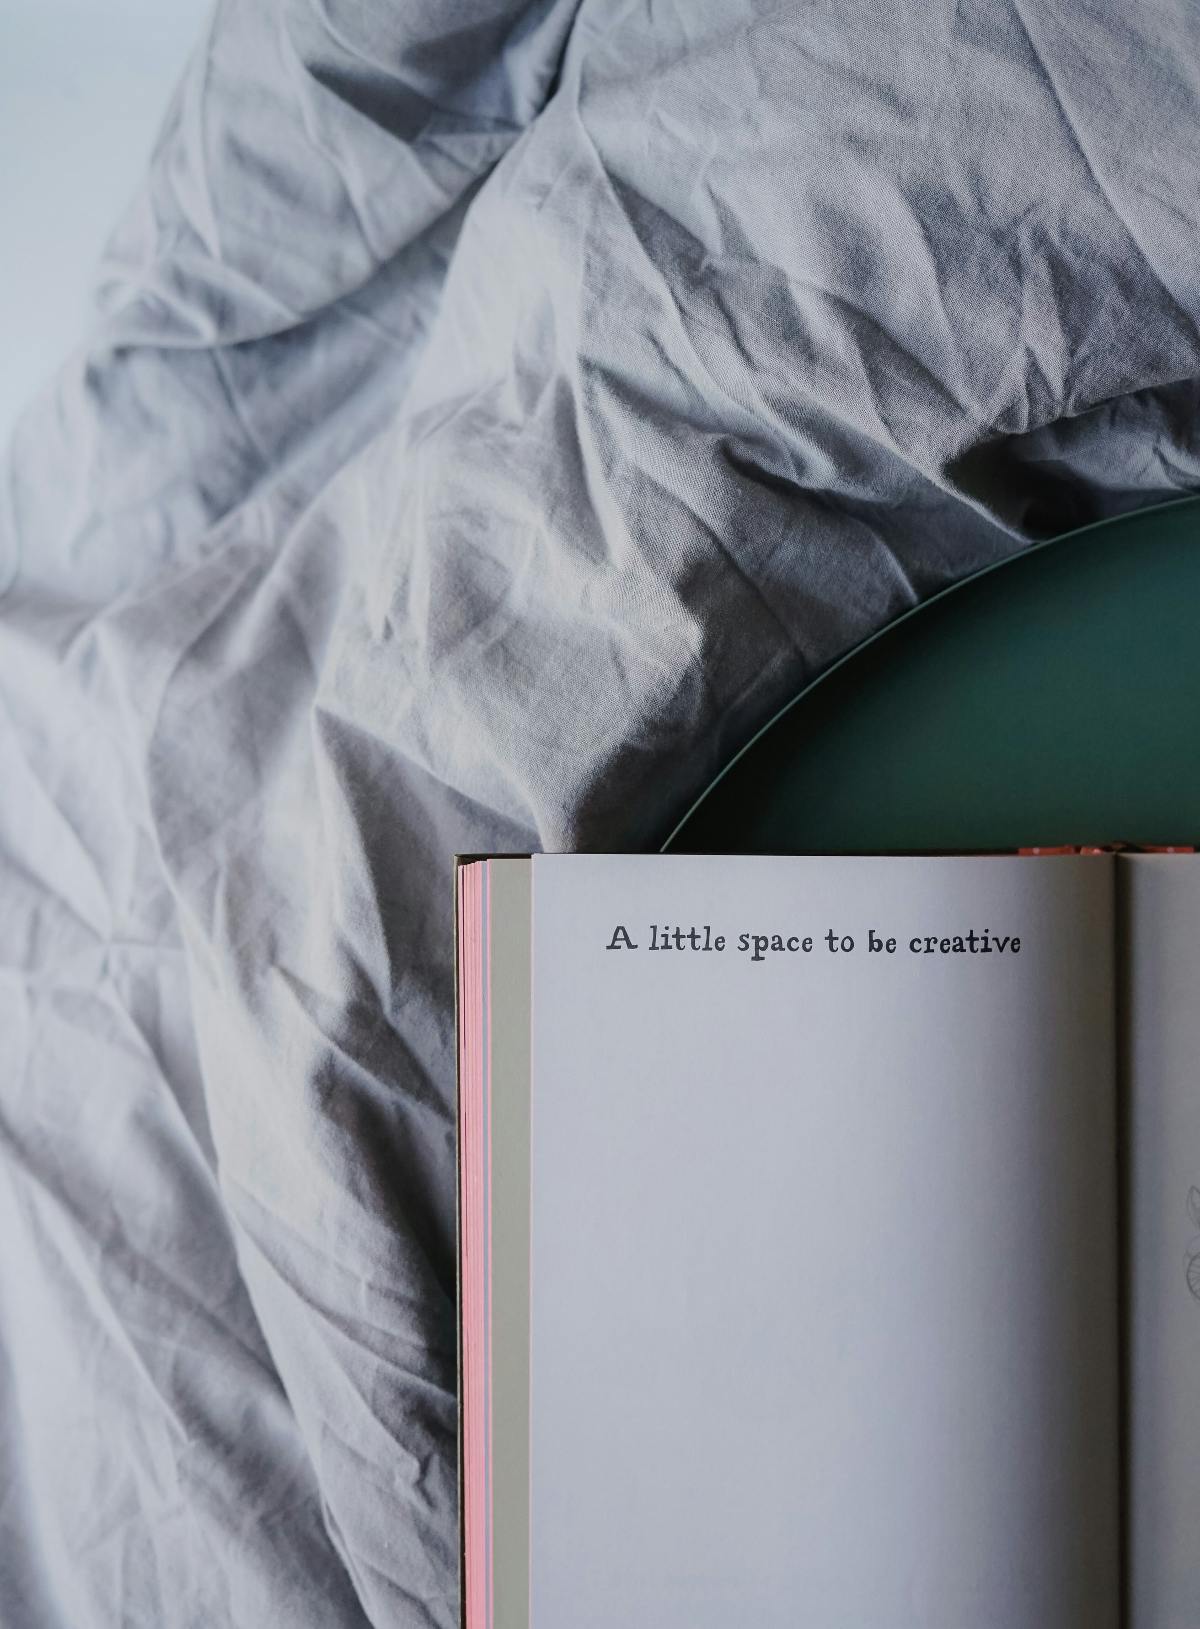 an open journal with the words "a littile space to be creative"